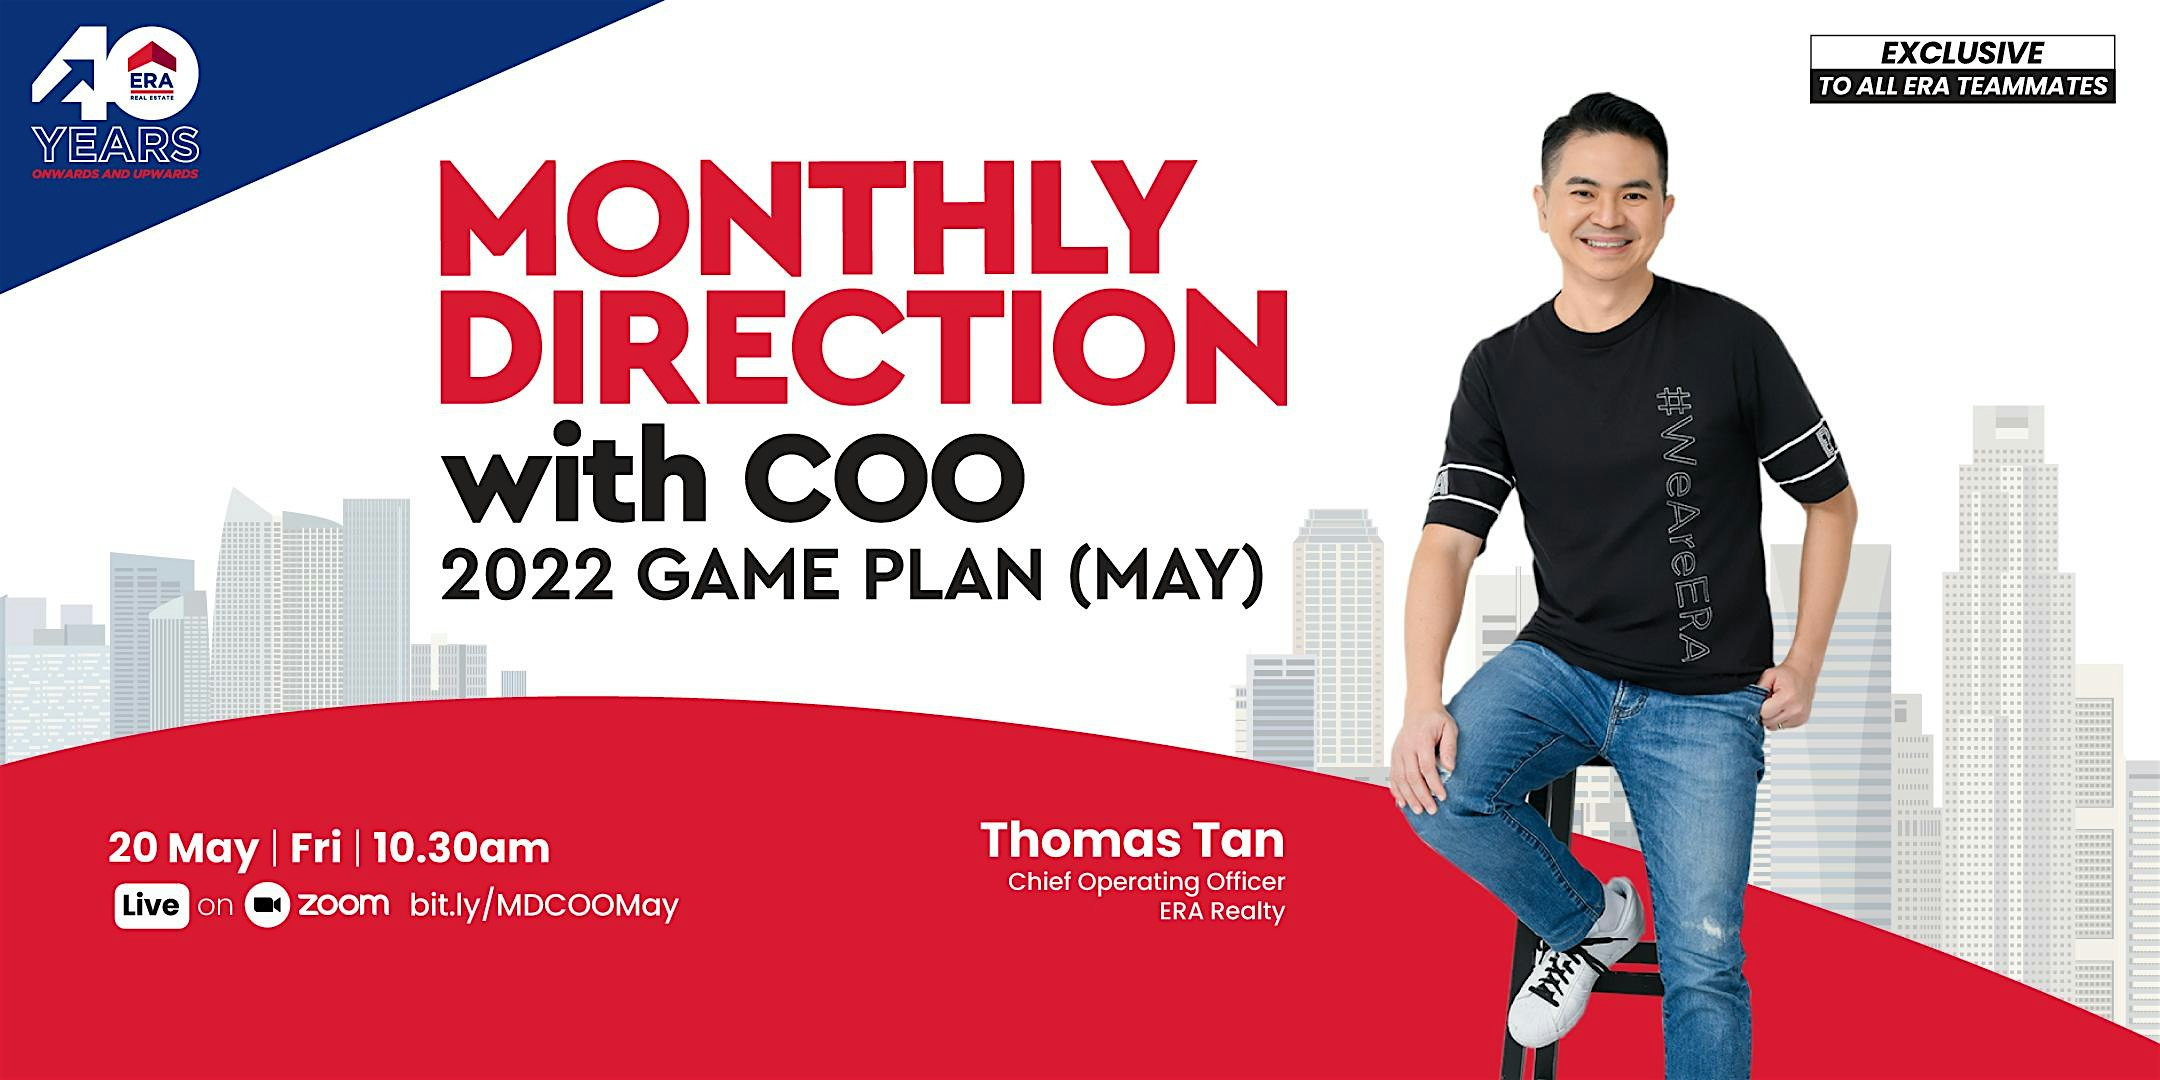 Monthly Direction with COO Thomas Tan